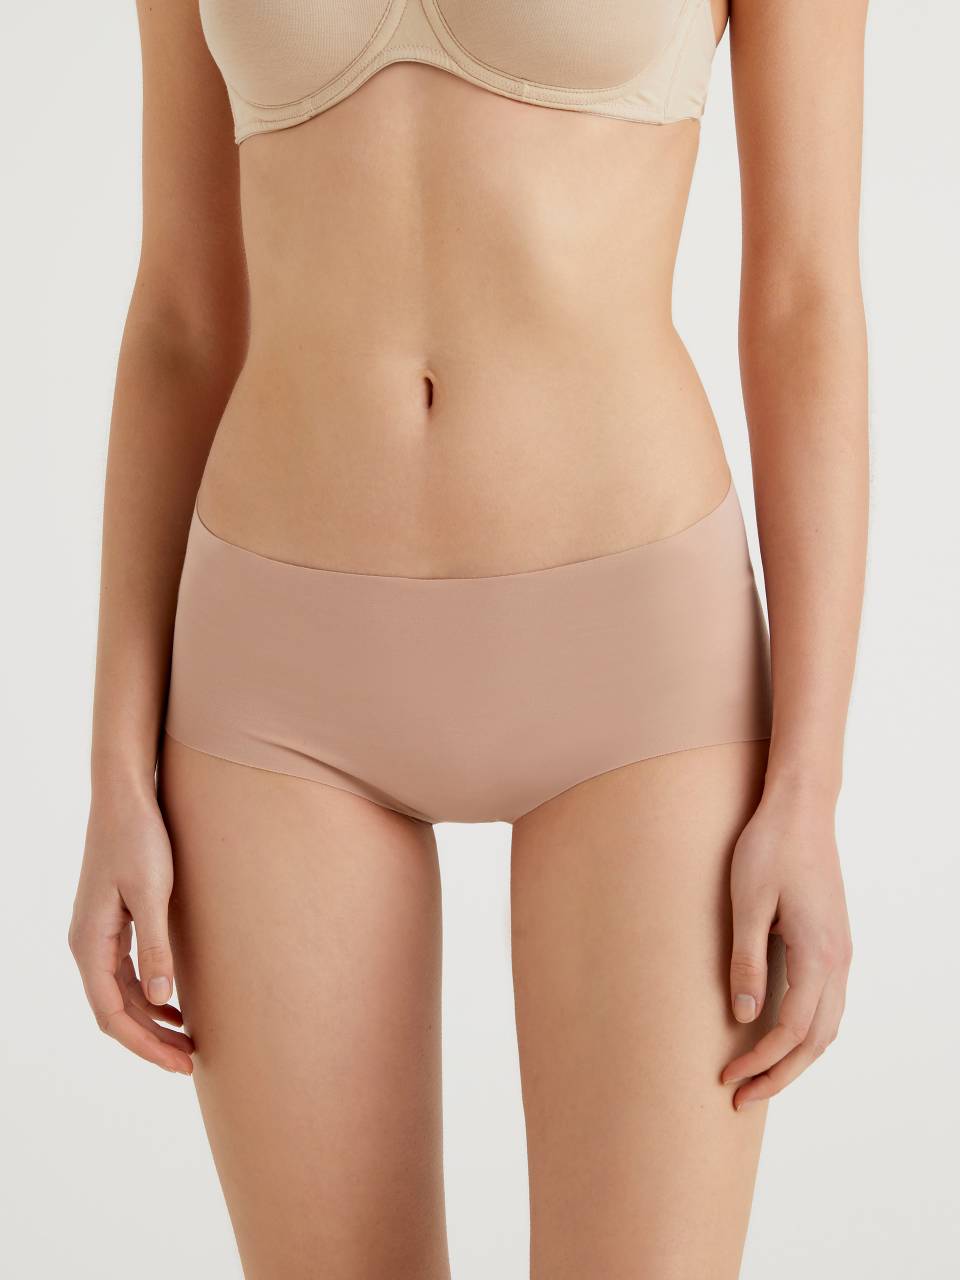 Women's Contrasting Color Hollow Nude Seamless Underwear Sports